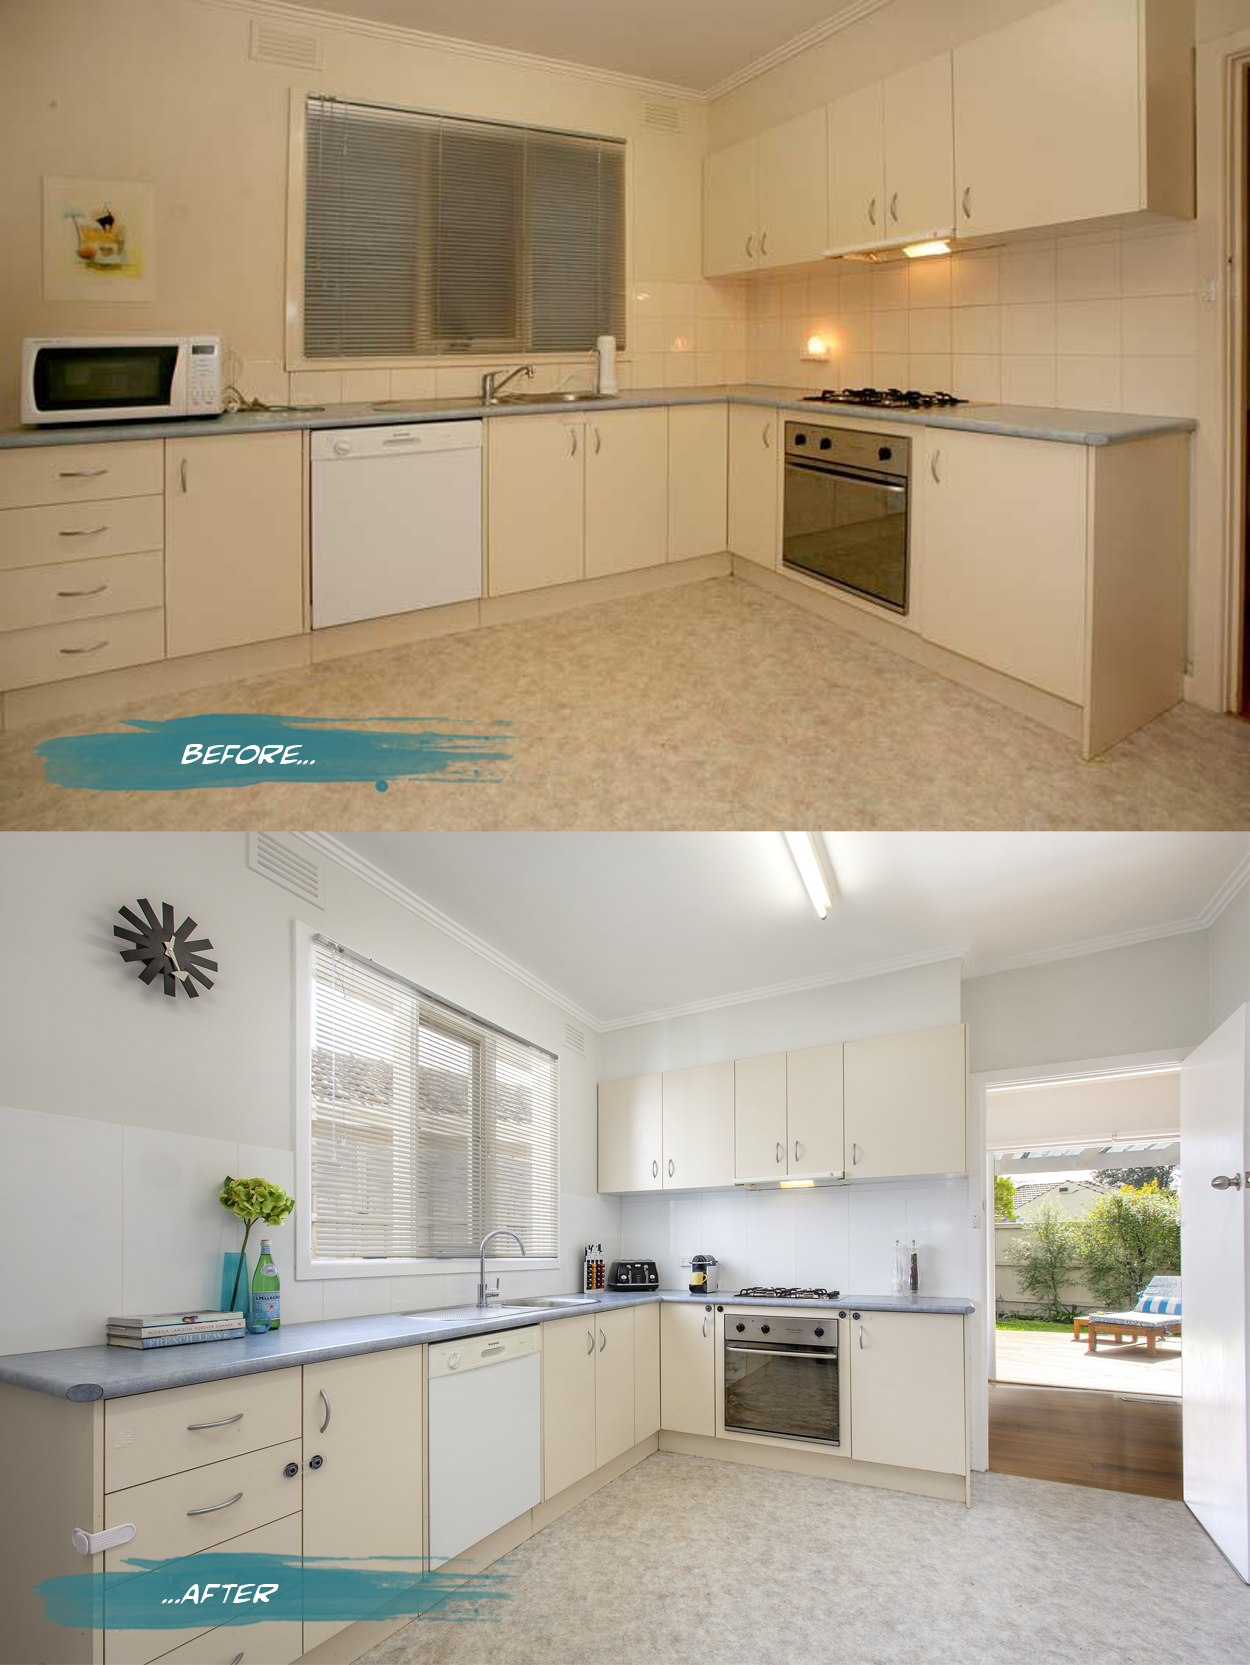 Kitchen before and after on Romona Sandon Designs blog. #interiors #beforeandafter #styling #home #kitchen